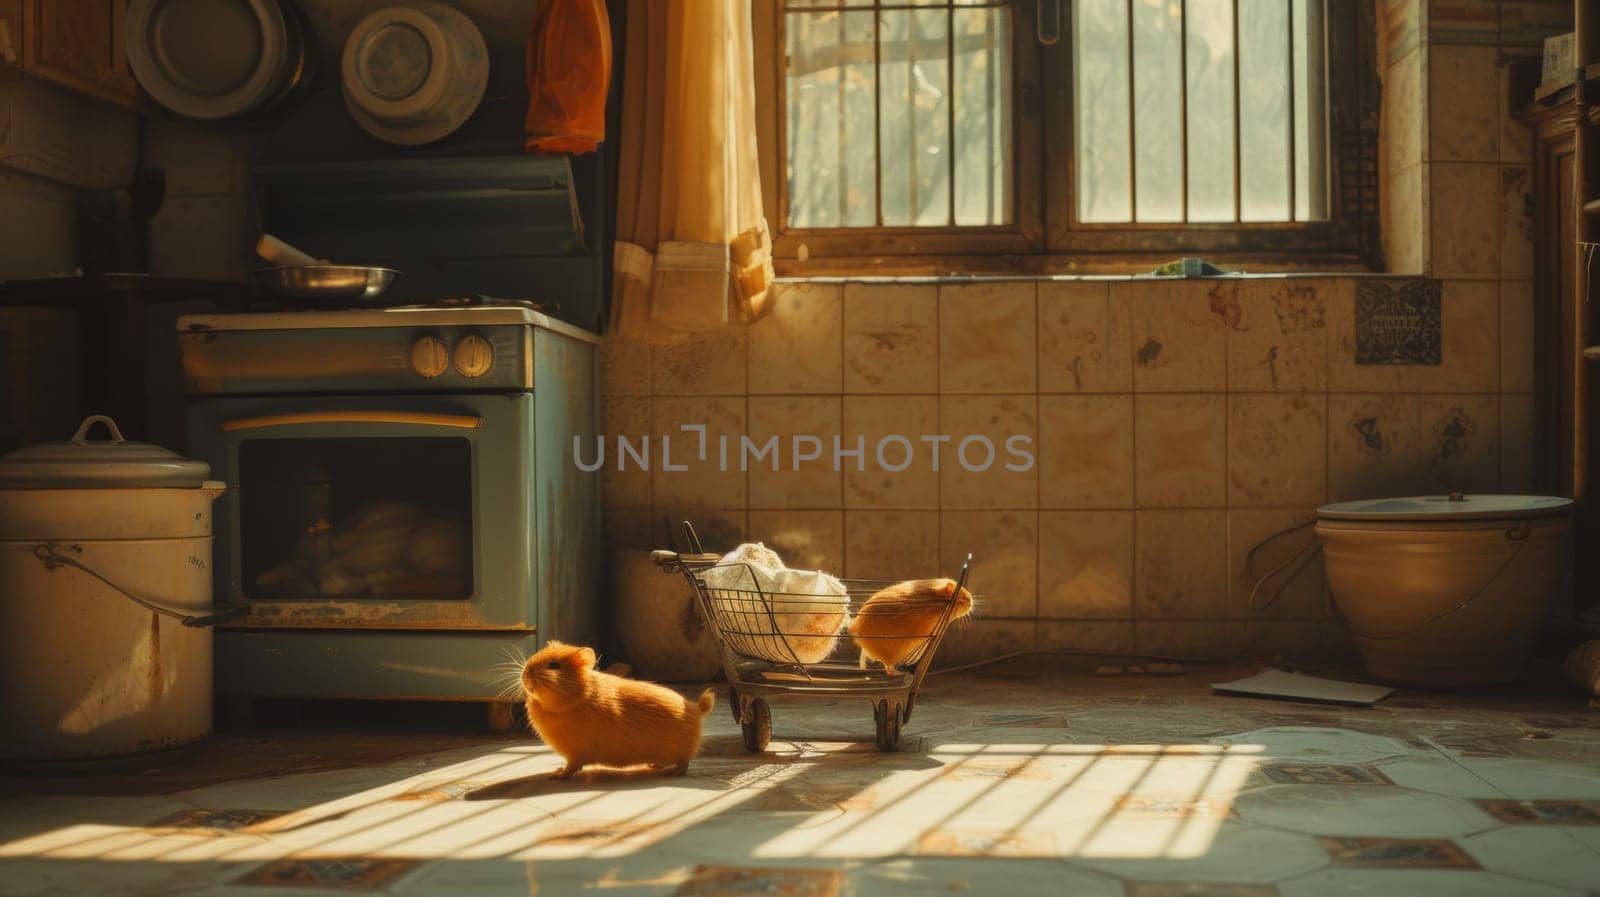 A small animals are in a basket on the floor of an old kitchen, AI by starush